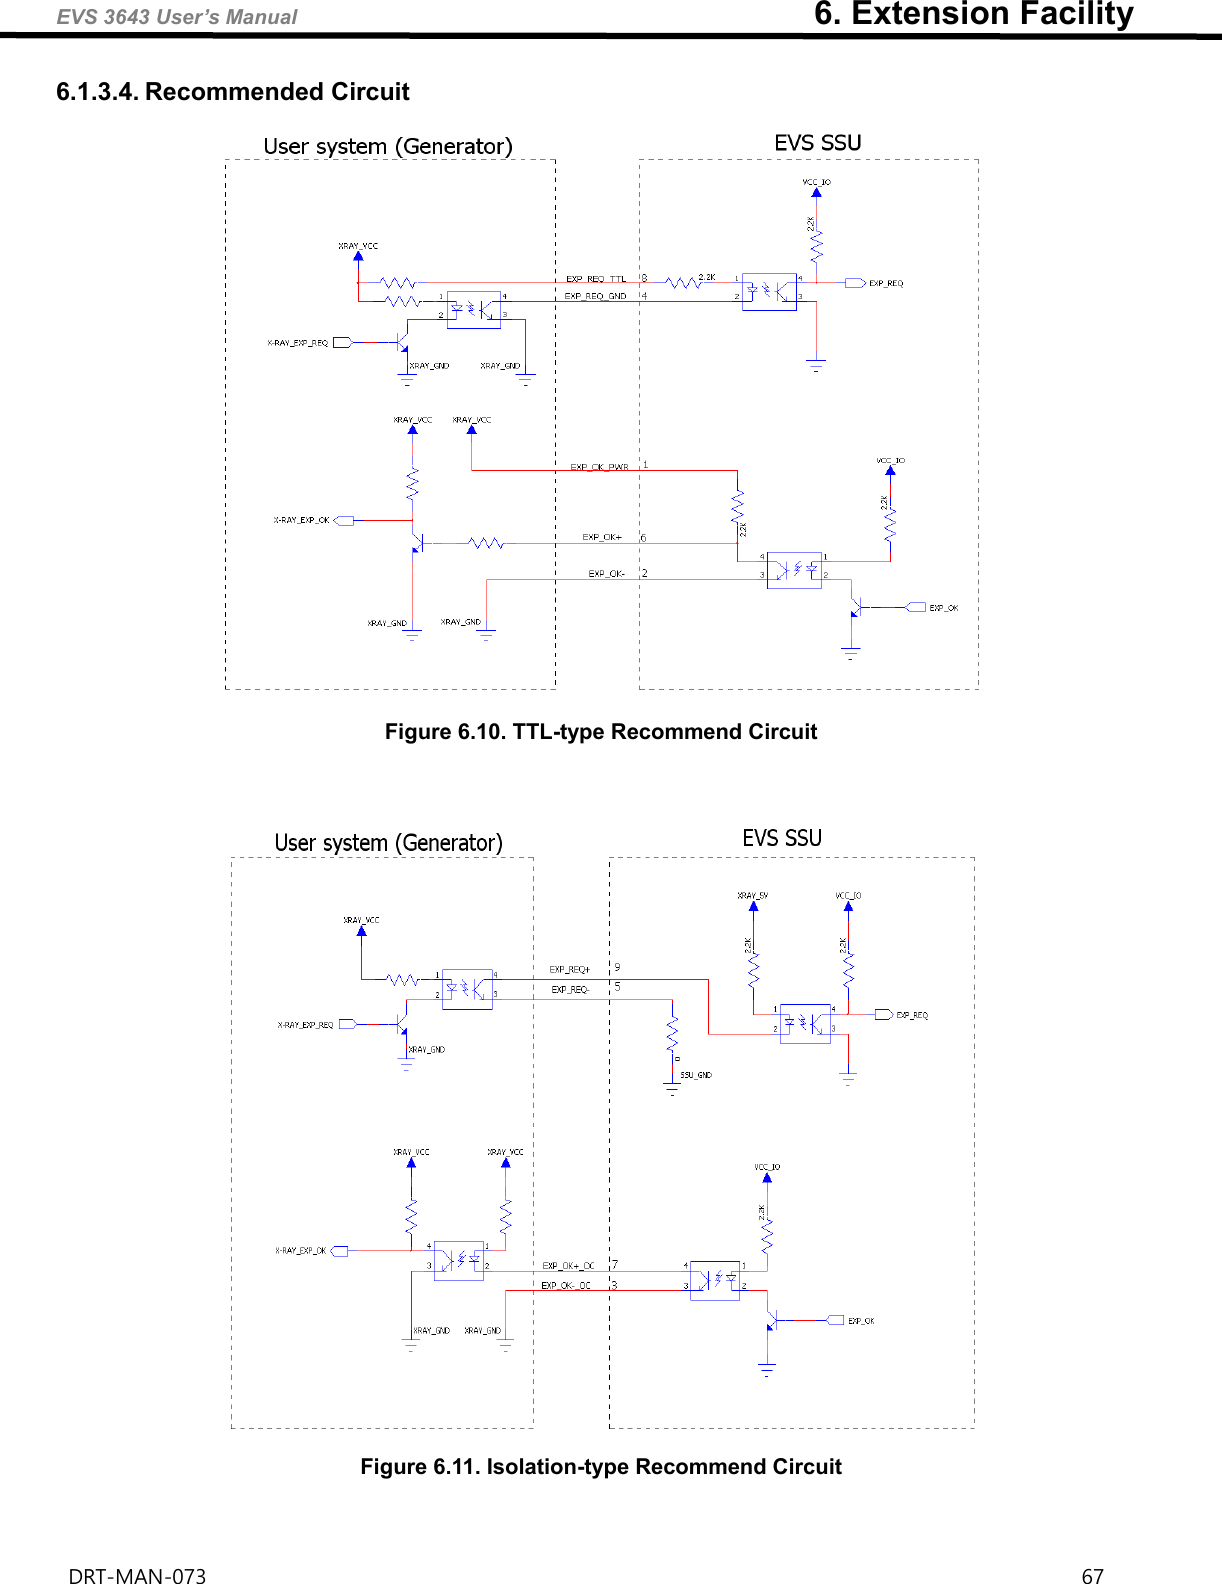 EVS 3643 User’s Manual                                                              6. Extension Facility DRT-MAN-073                                                                                                                                                                67   6.1.3.4. Recommended Circuit   Figure 6.10. TTL-type Recommend Circuit      Figure 6.11. Isolation-type Recommend Circuit      